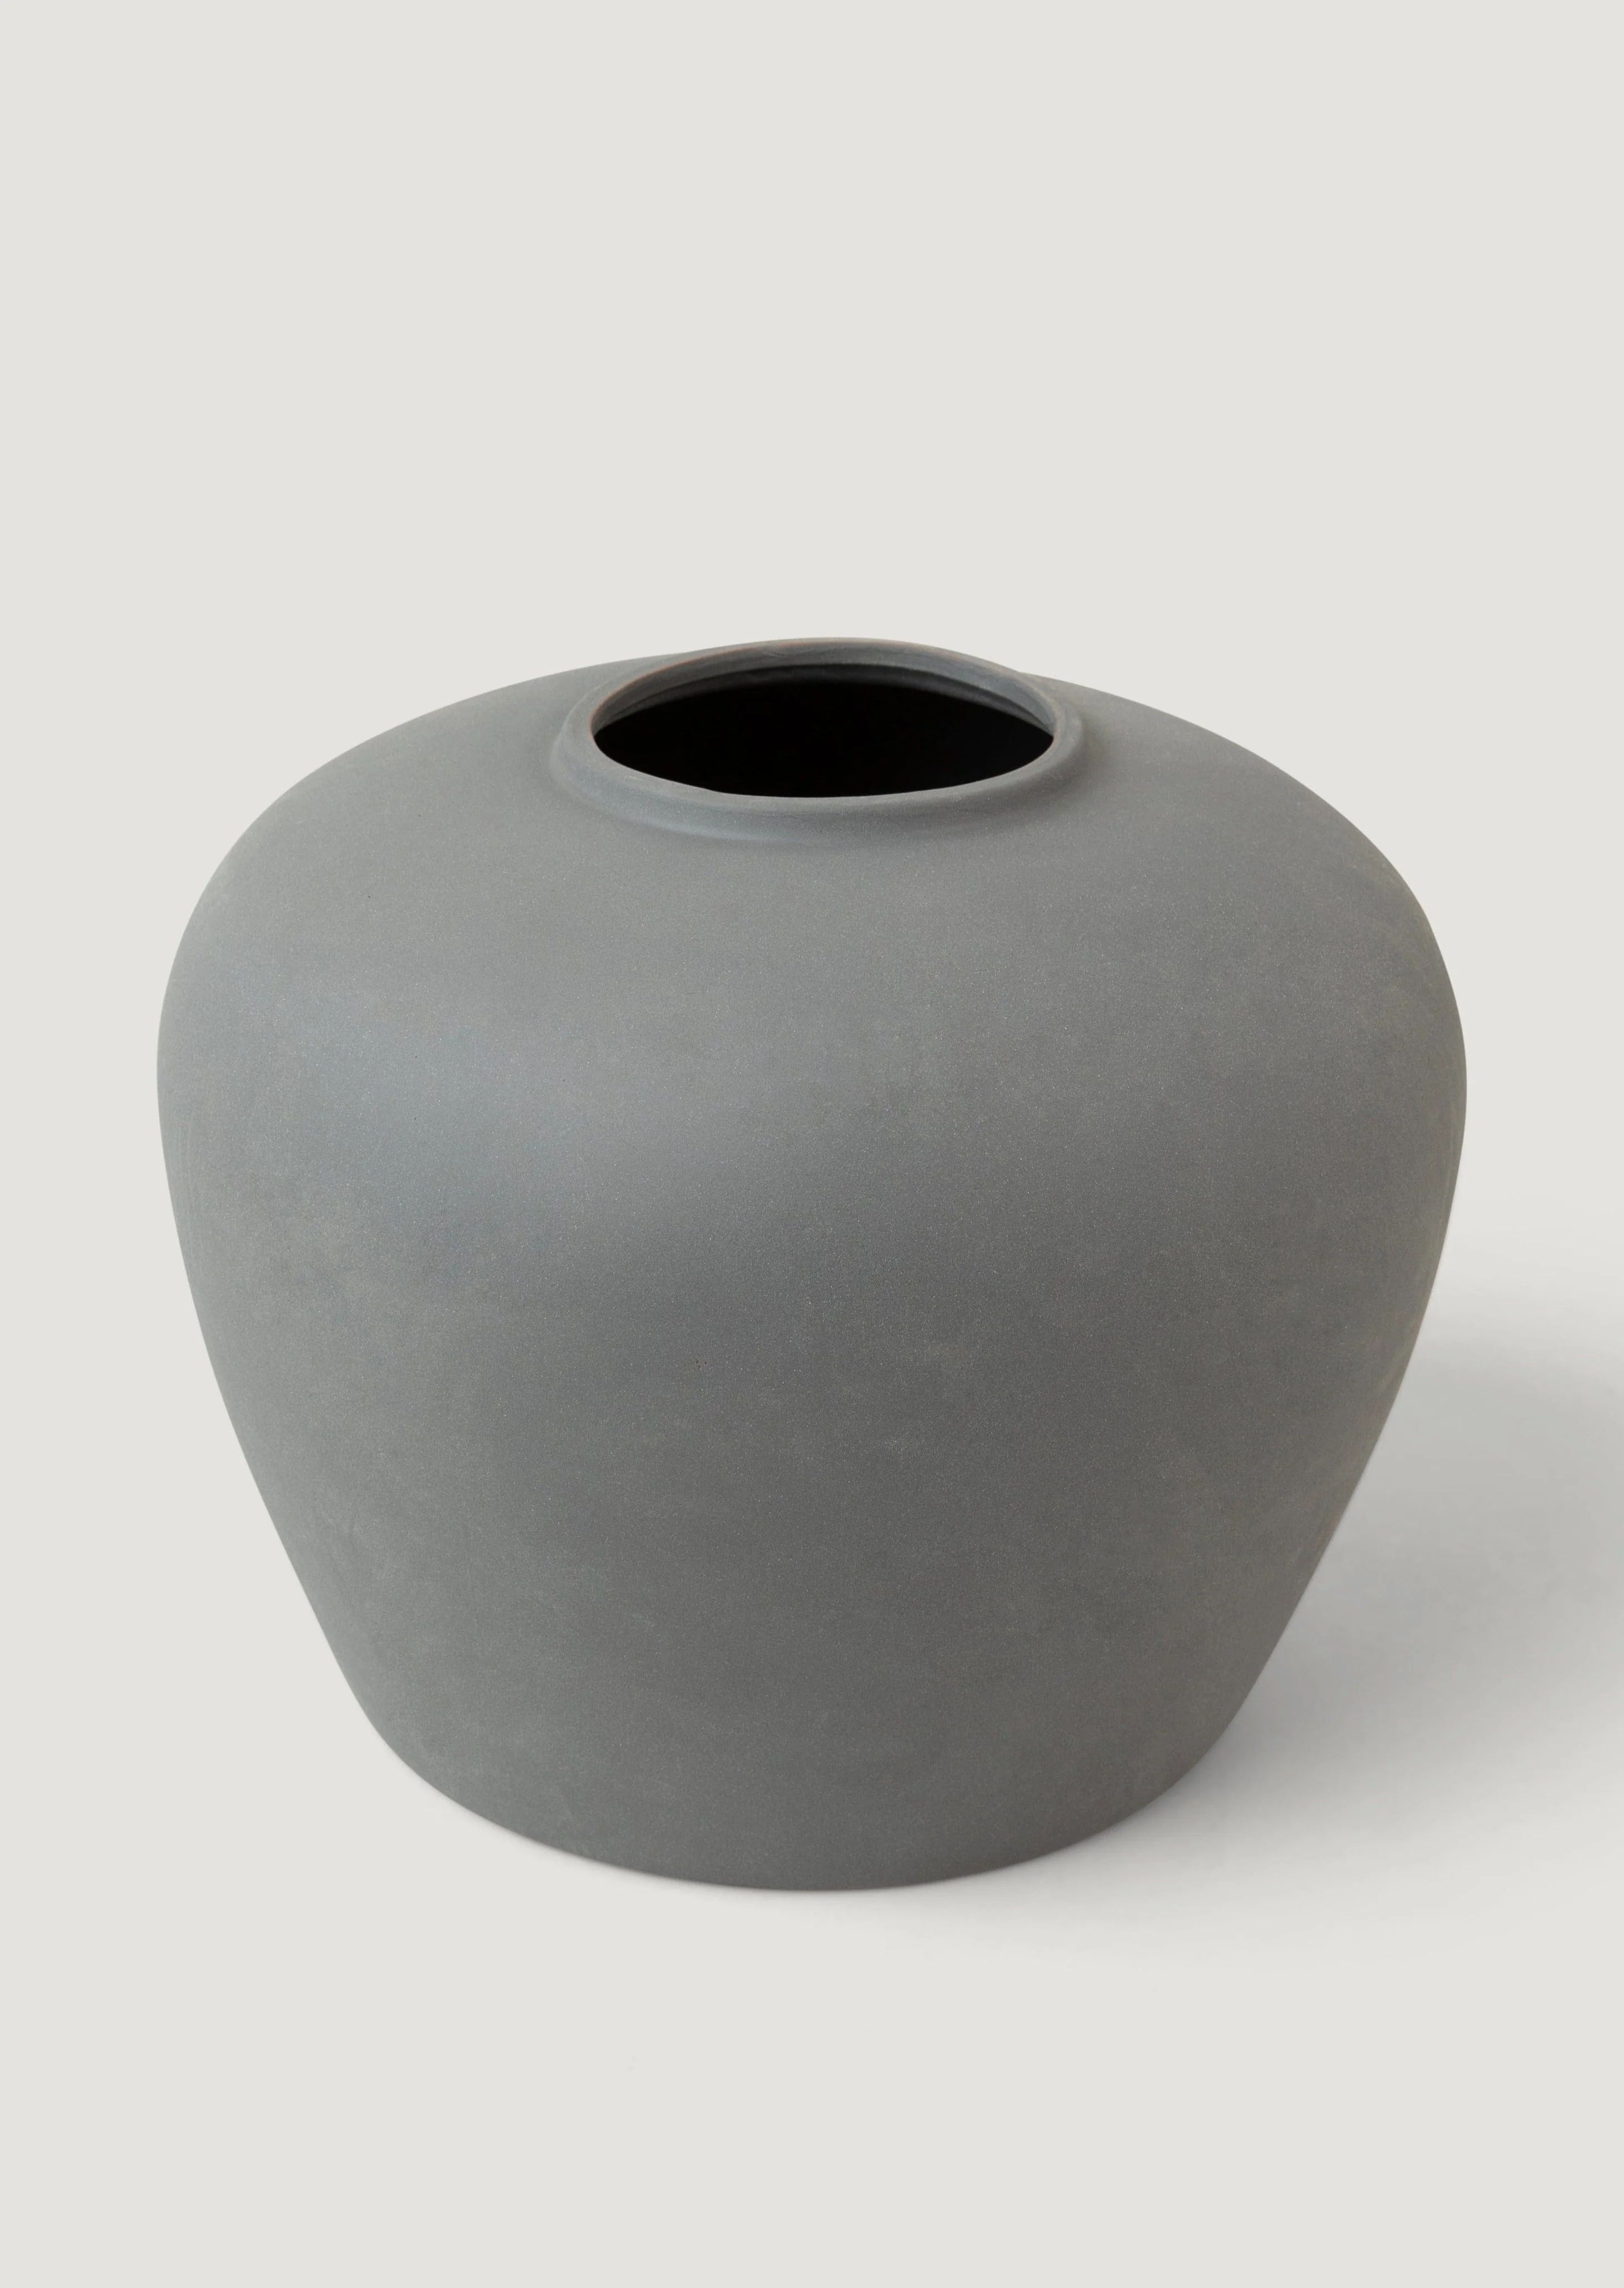 Smokey Slate Large Clay Table Vase - 11" | Afloral